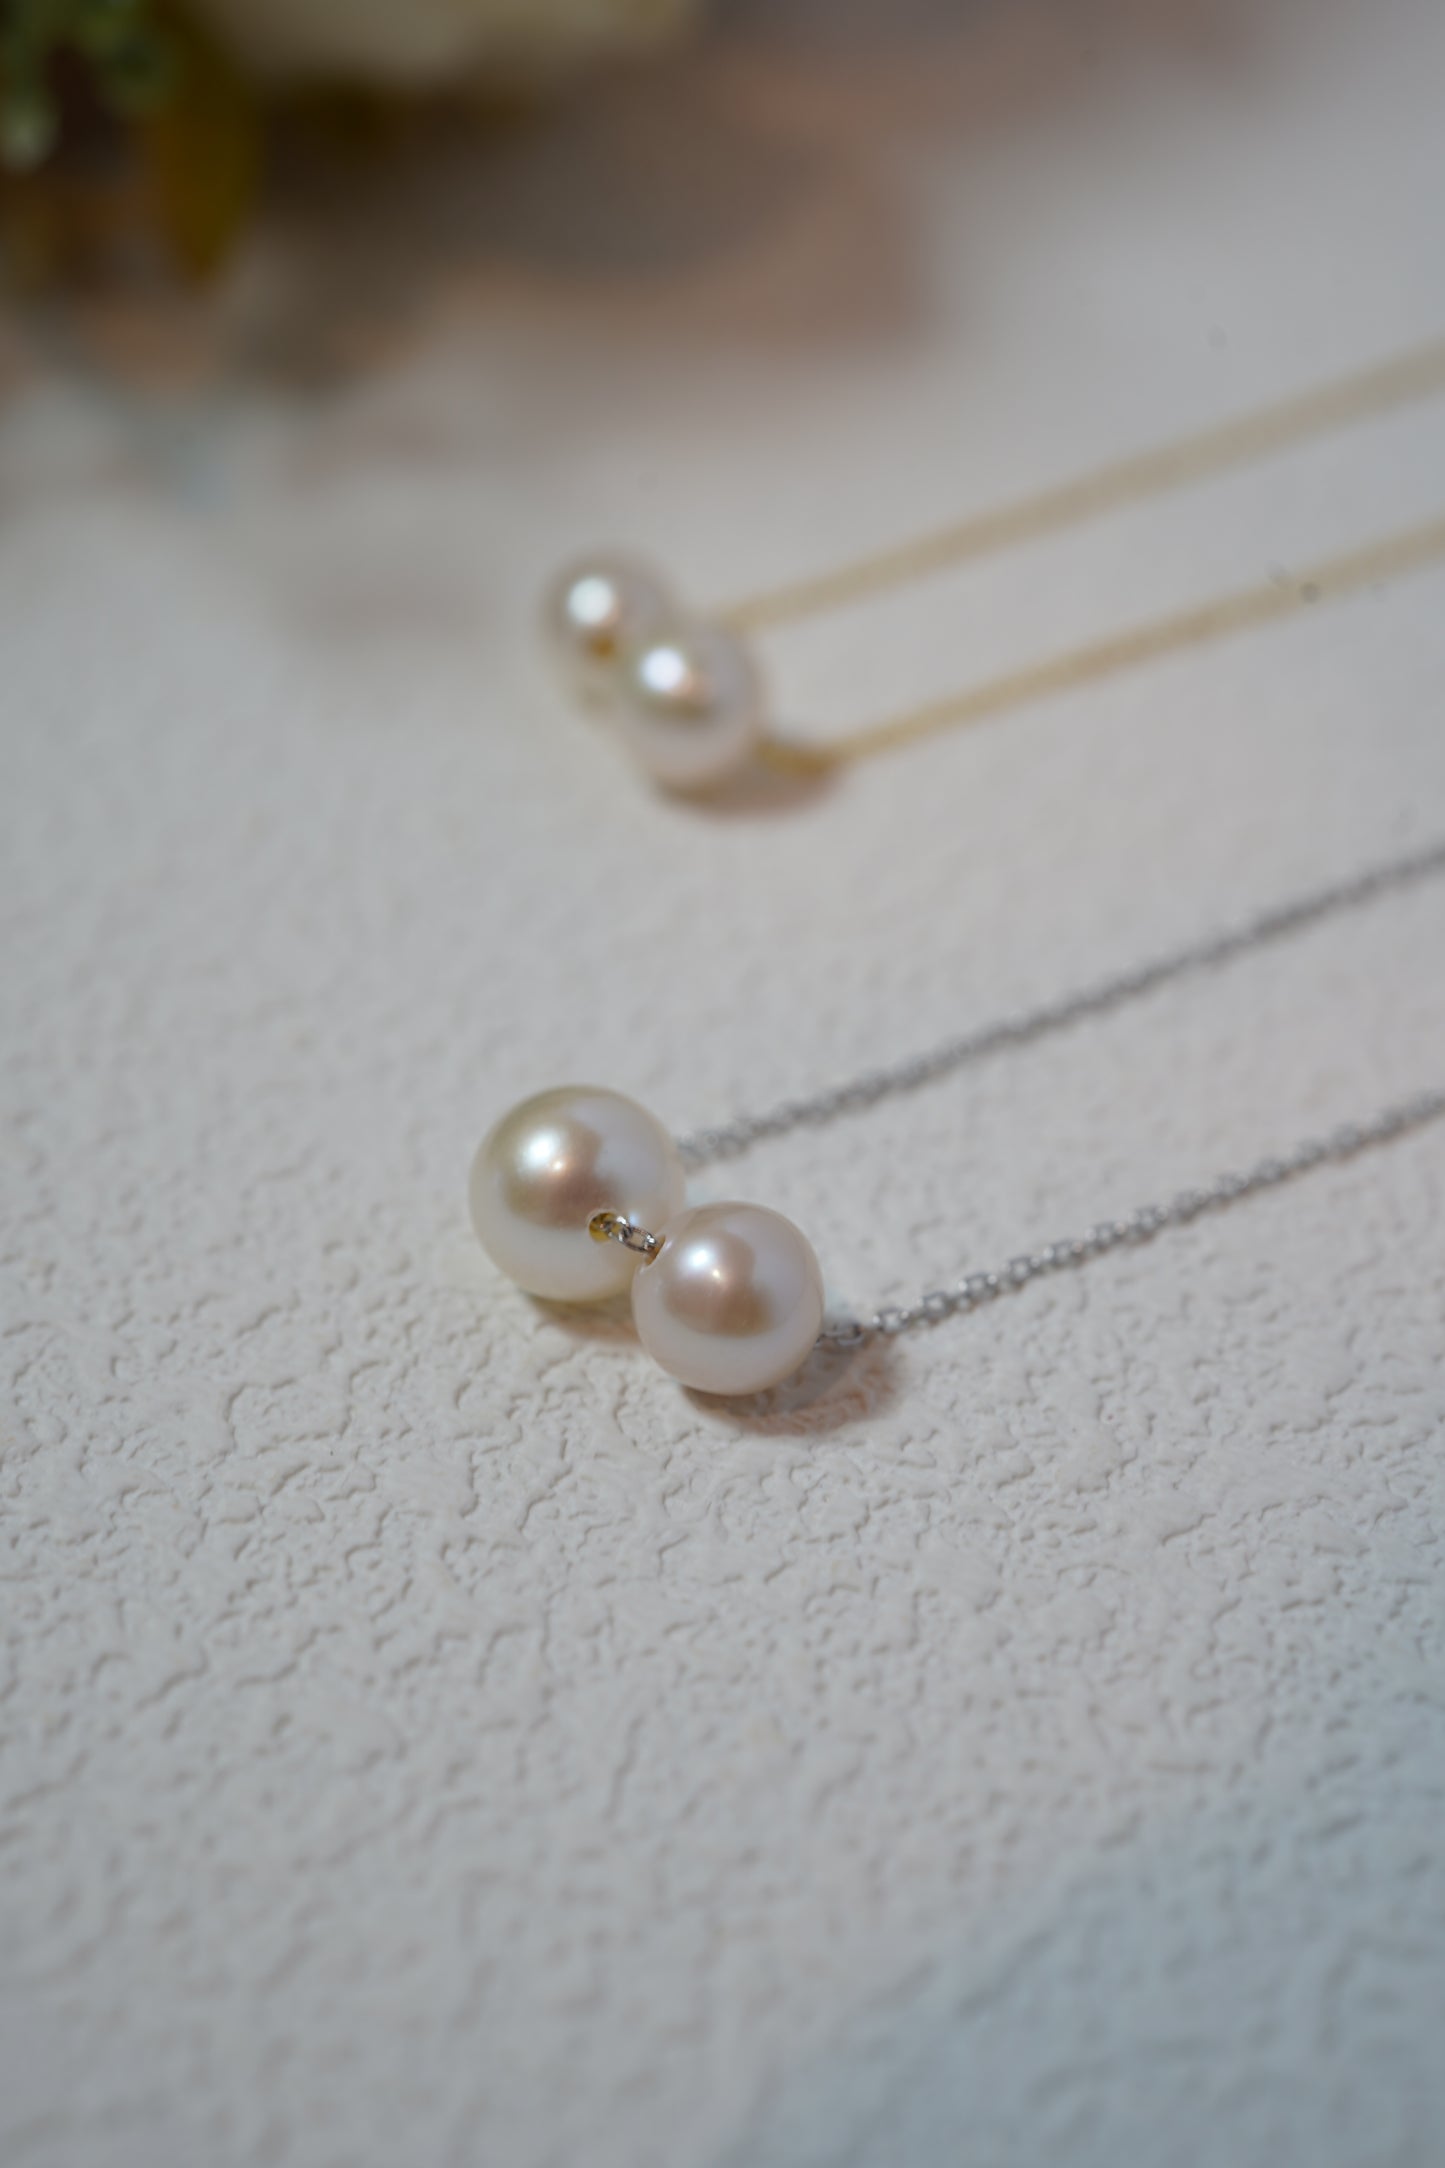 Mom & Girls Round Freshwater Pearls Necklace